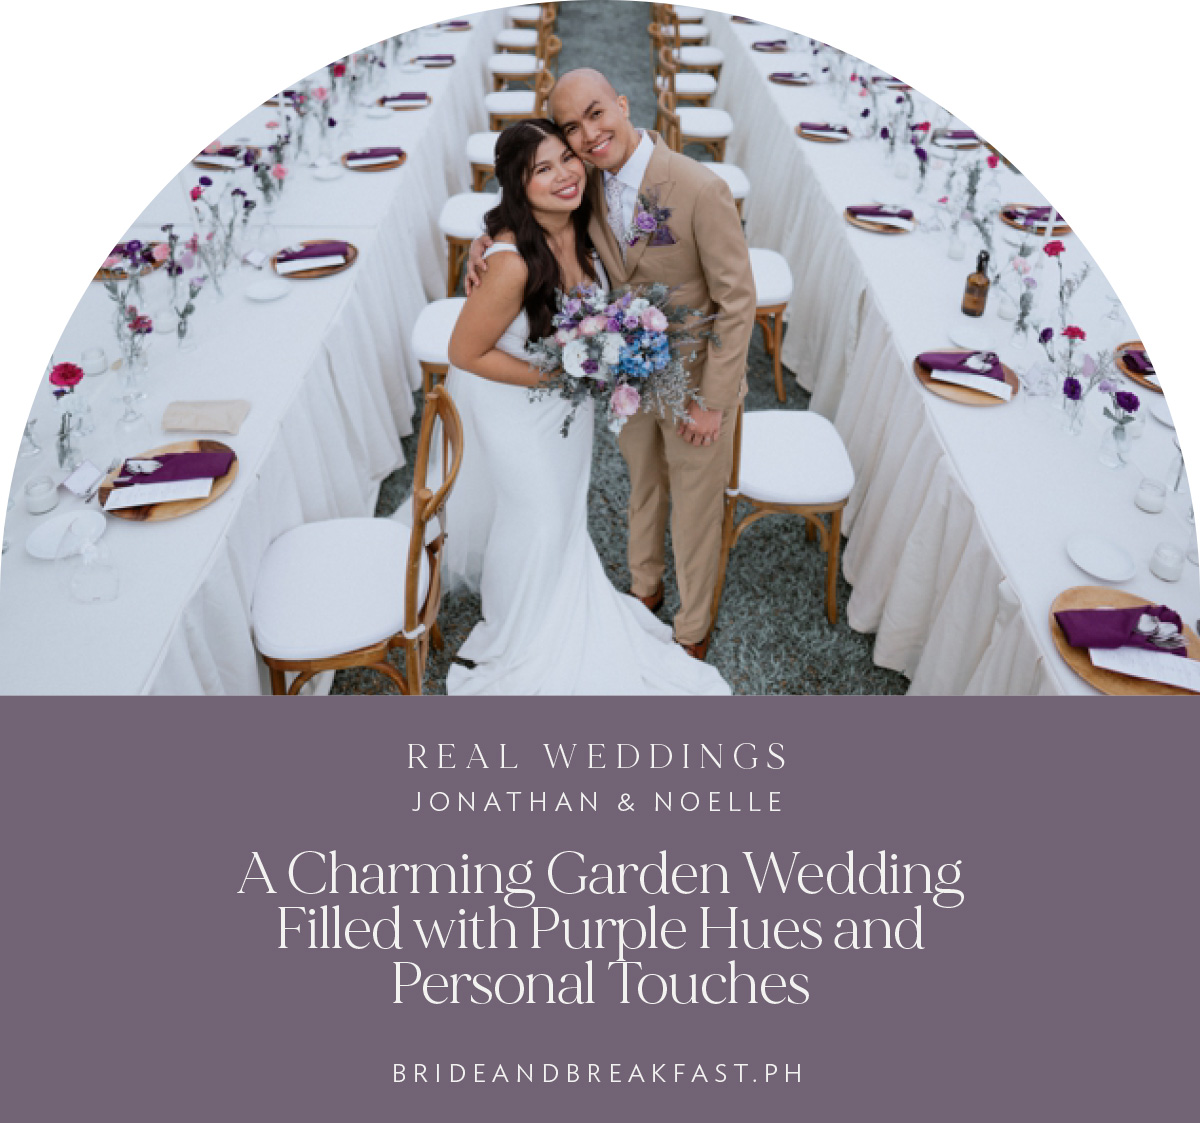 A Charming Garden Wedding Filled with Purple Hues and Personal Touches